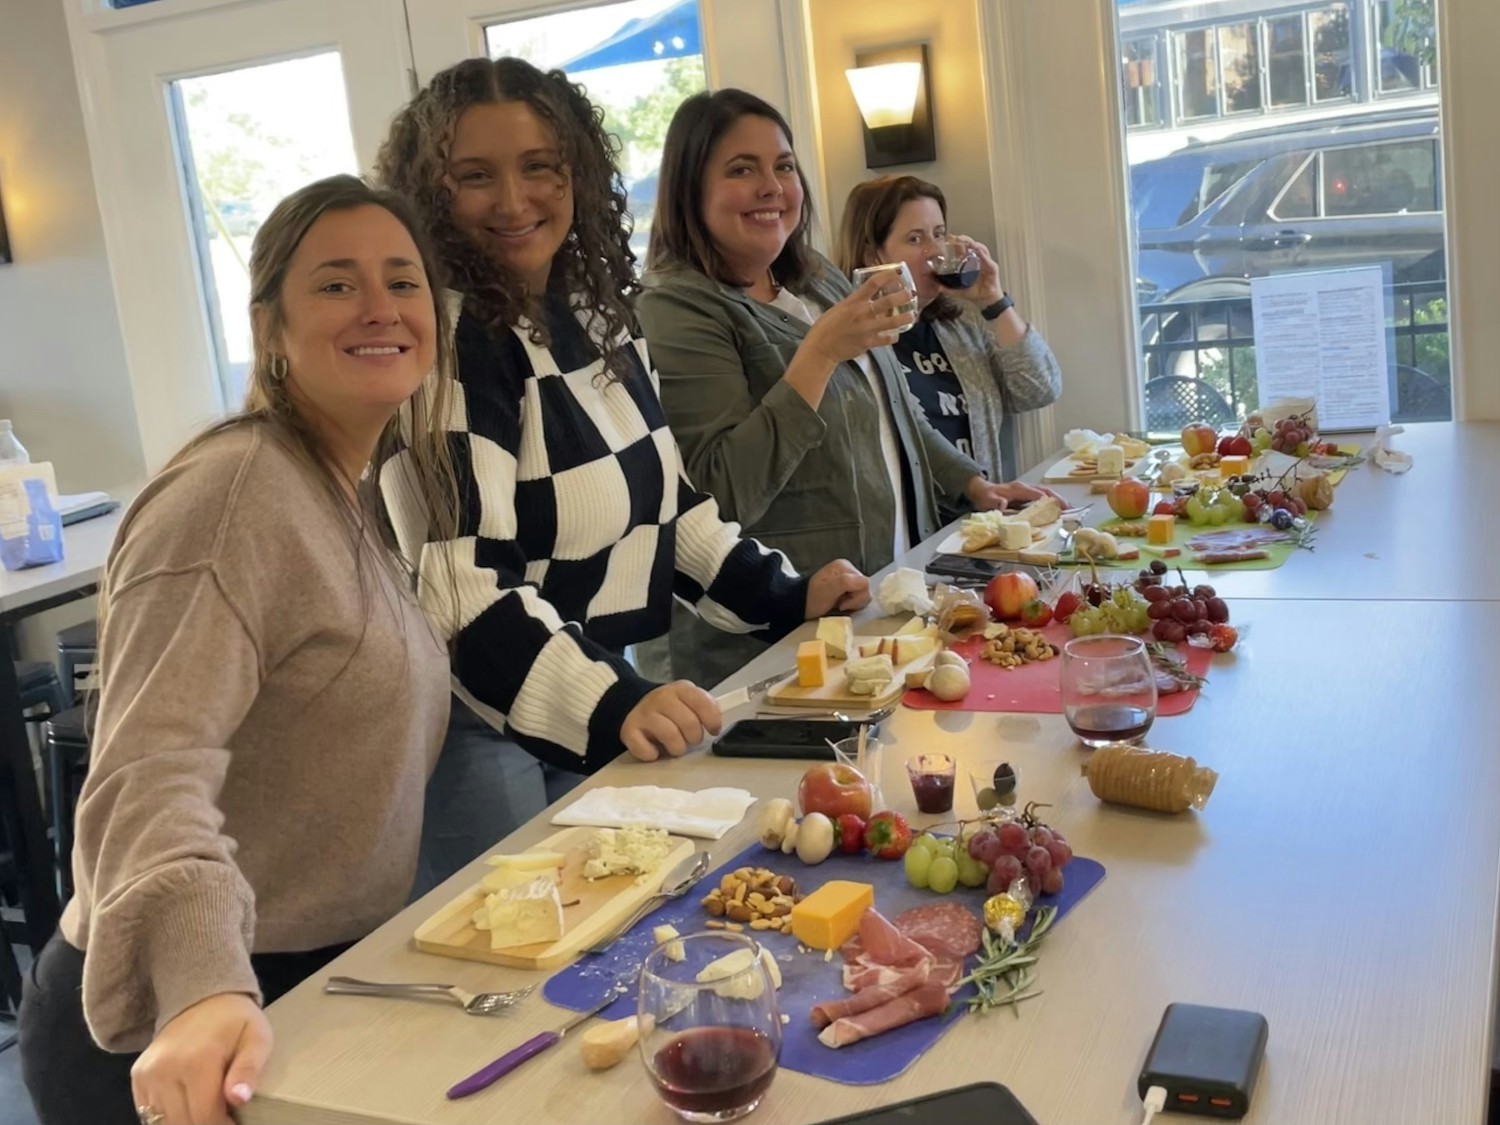 The Accounts Team gathers for a bonding activity and learns to make charcuterie boards.